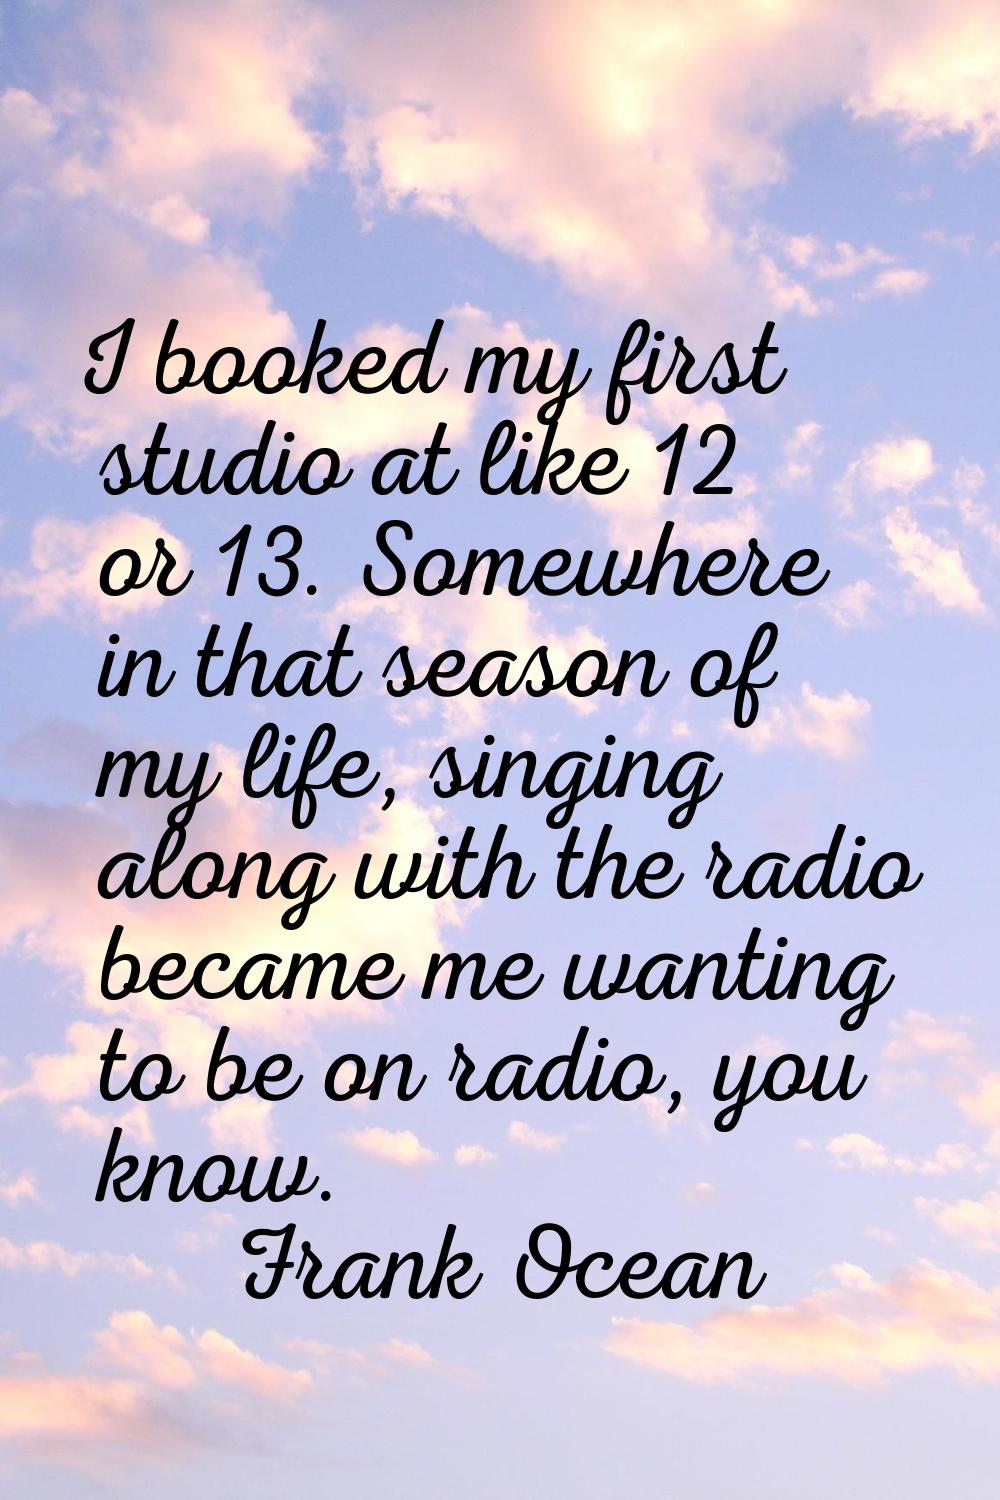 I booked my first studio at like 12 or 13. Somewhere in that season of my life, singing along with 